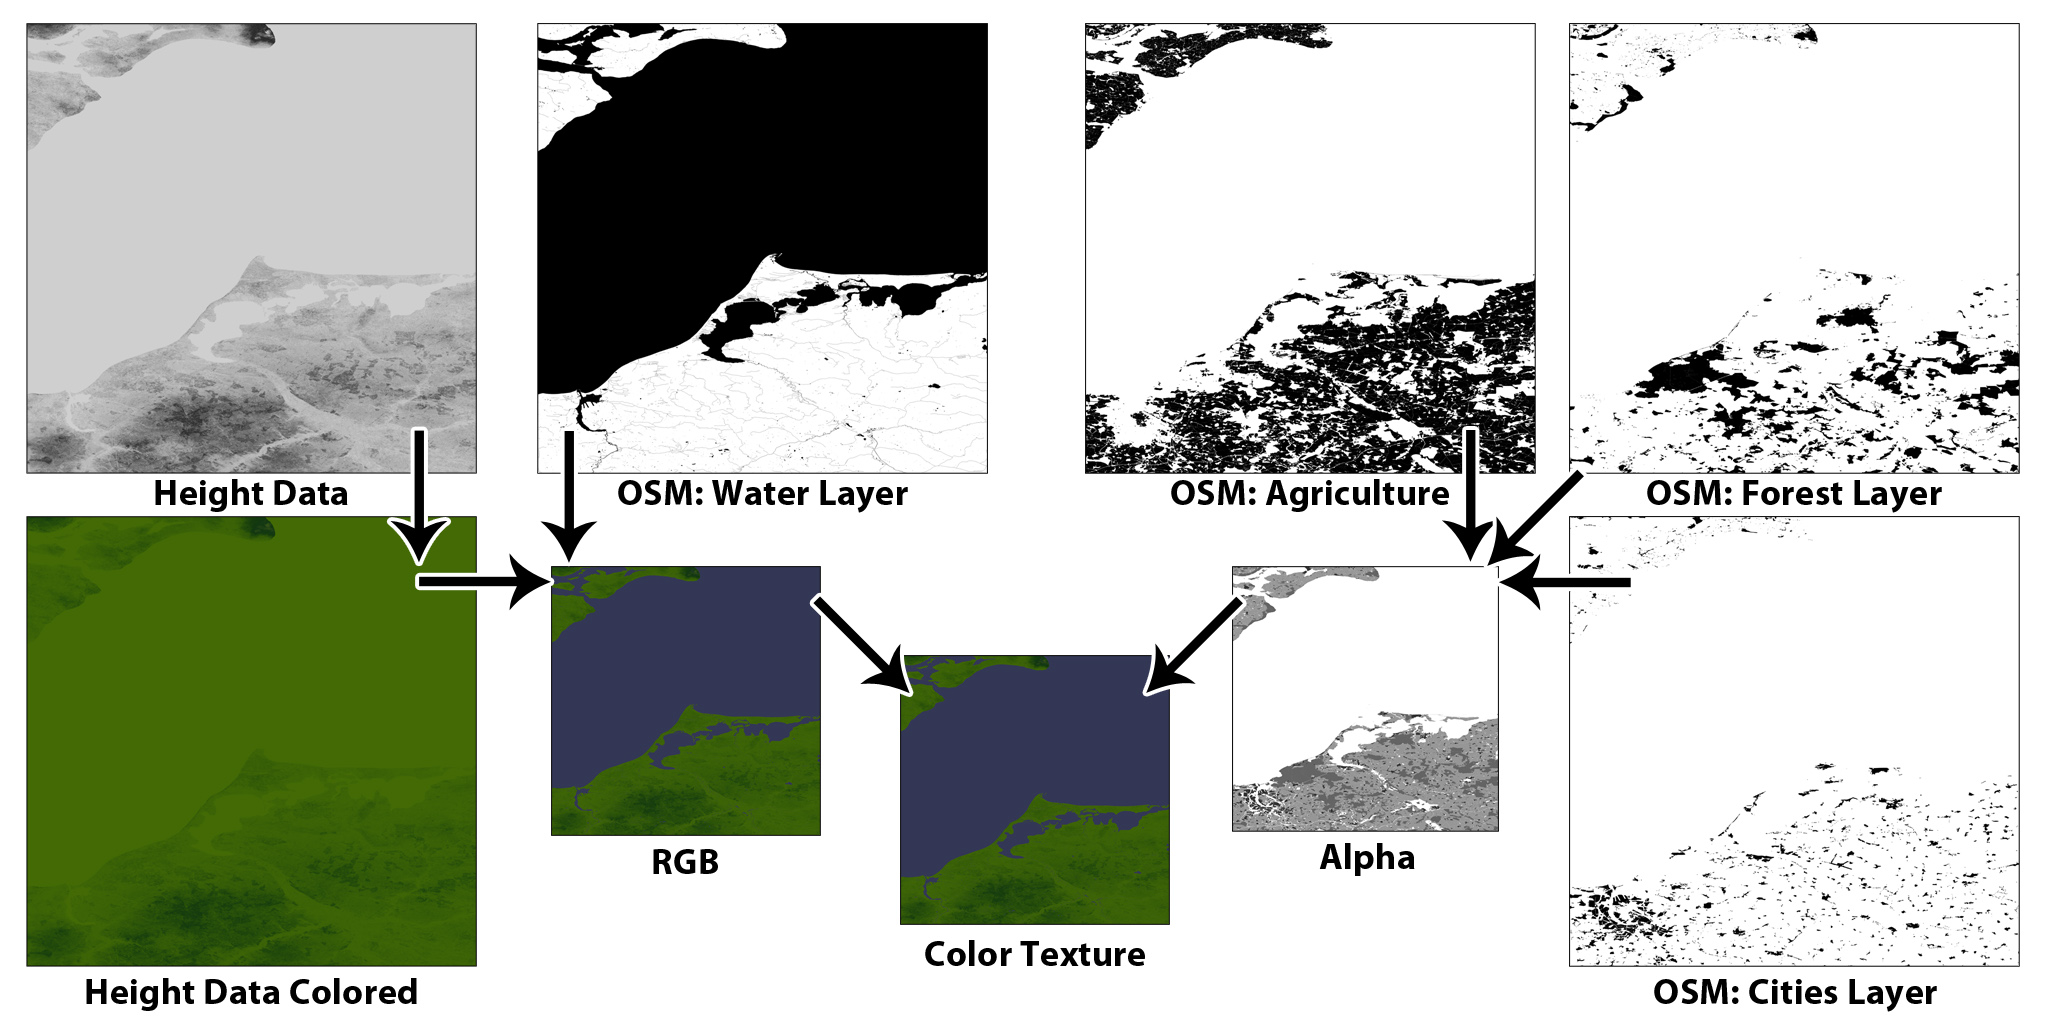 Composition of the color texture with elevation coloring, water and land use